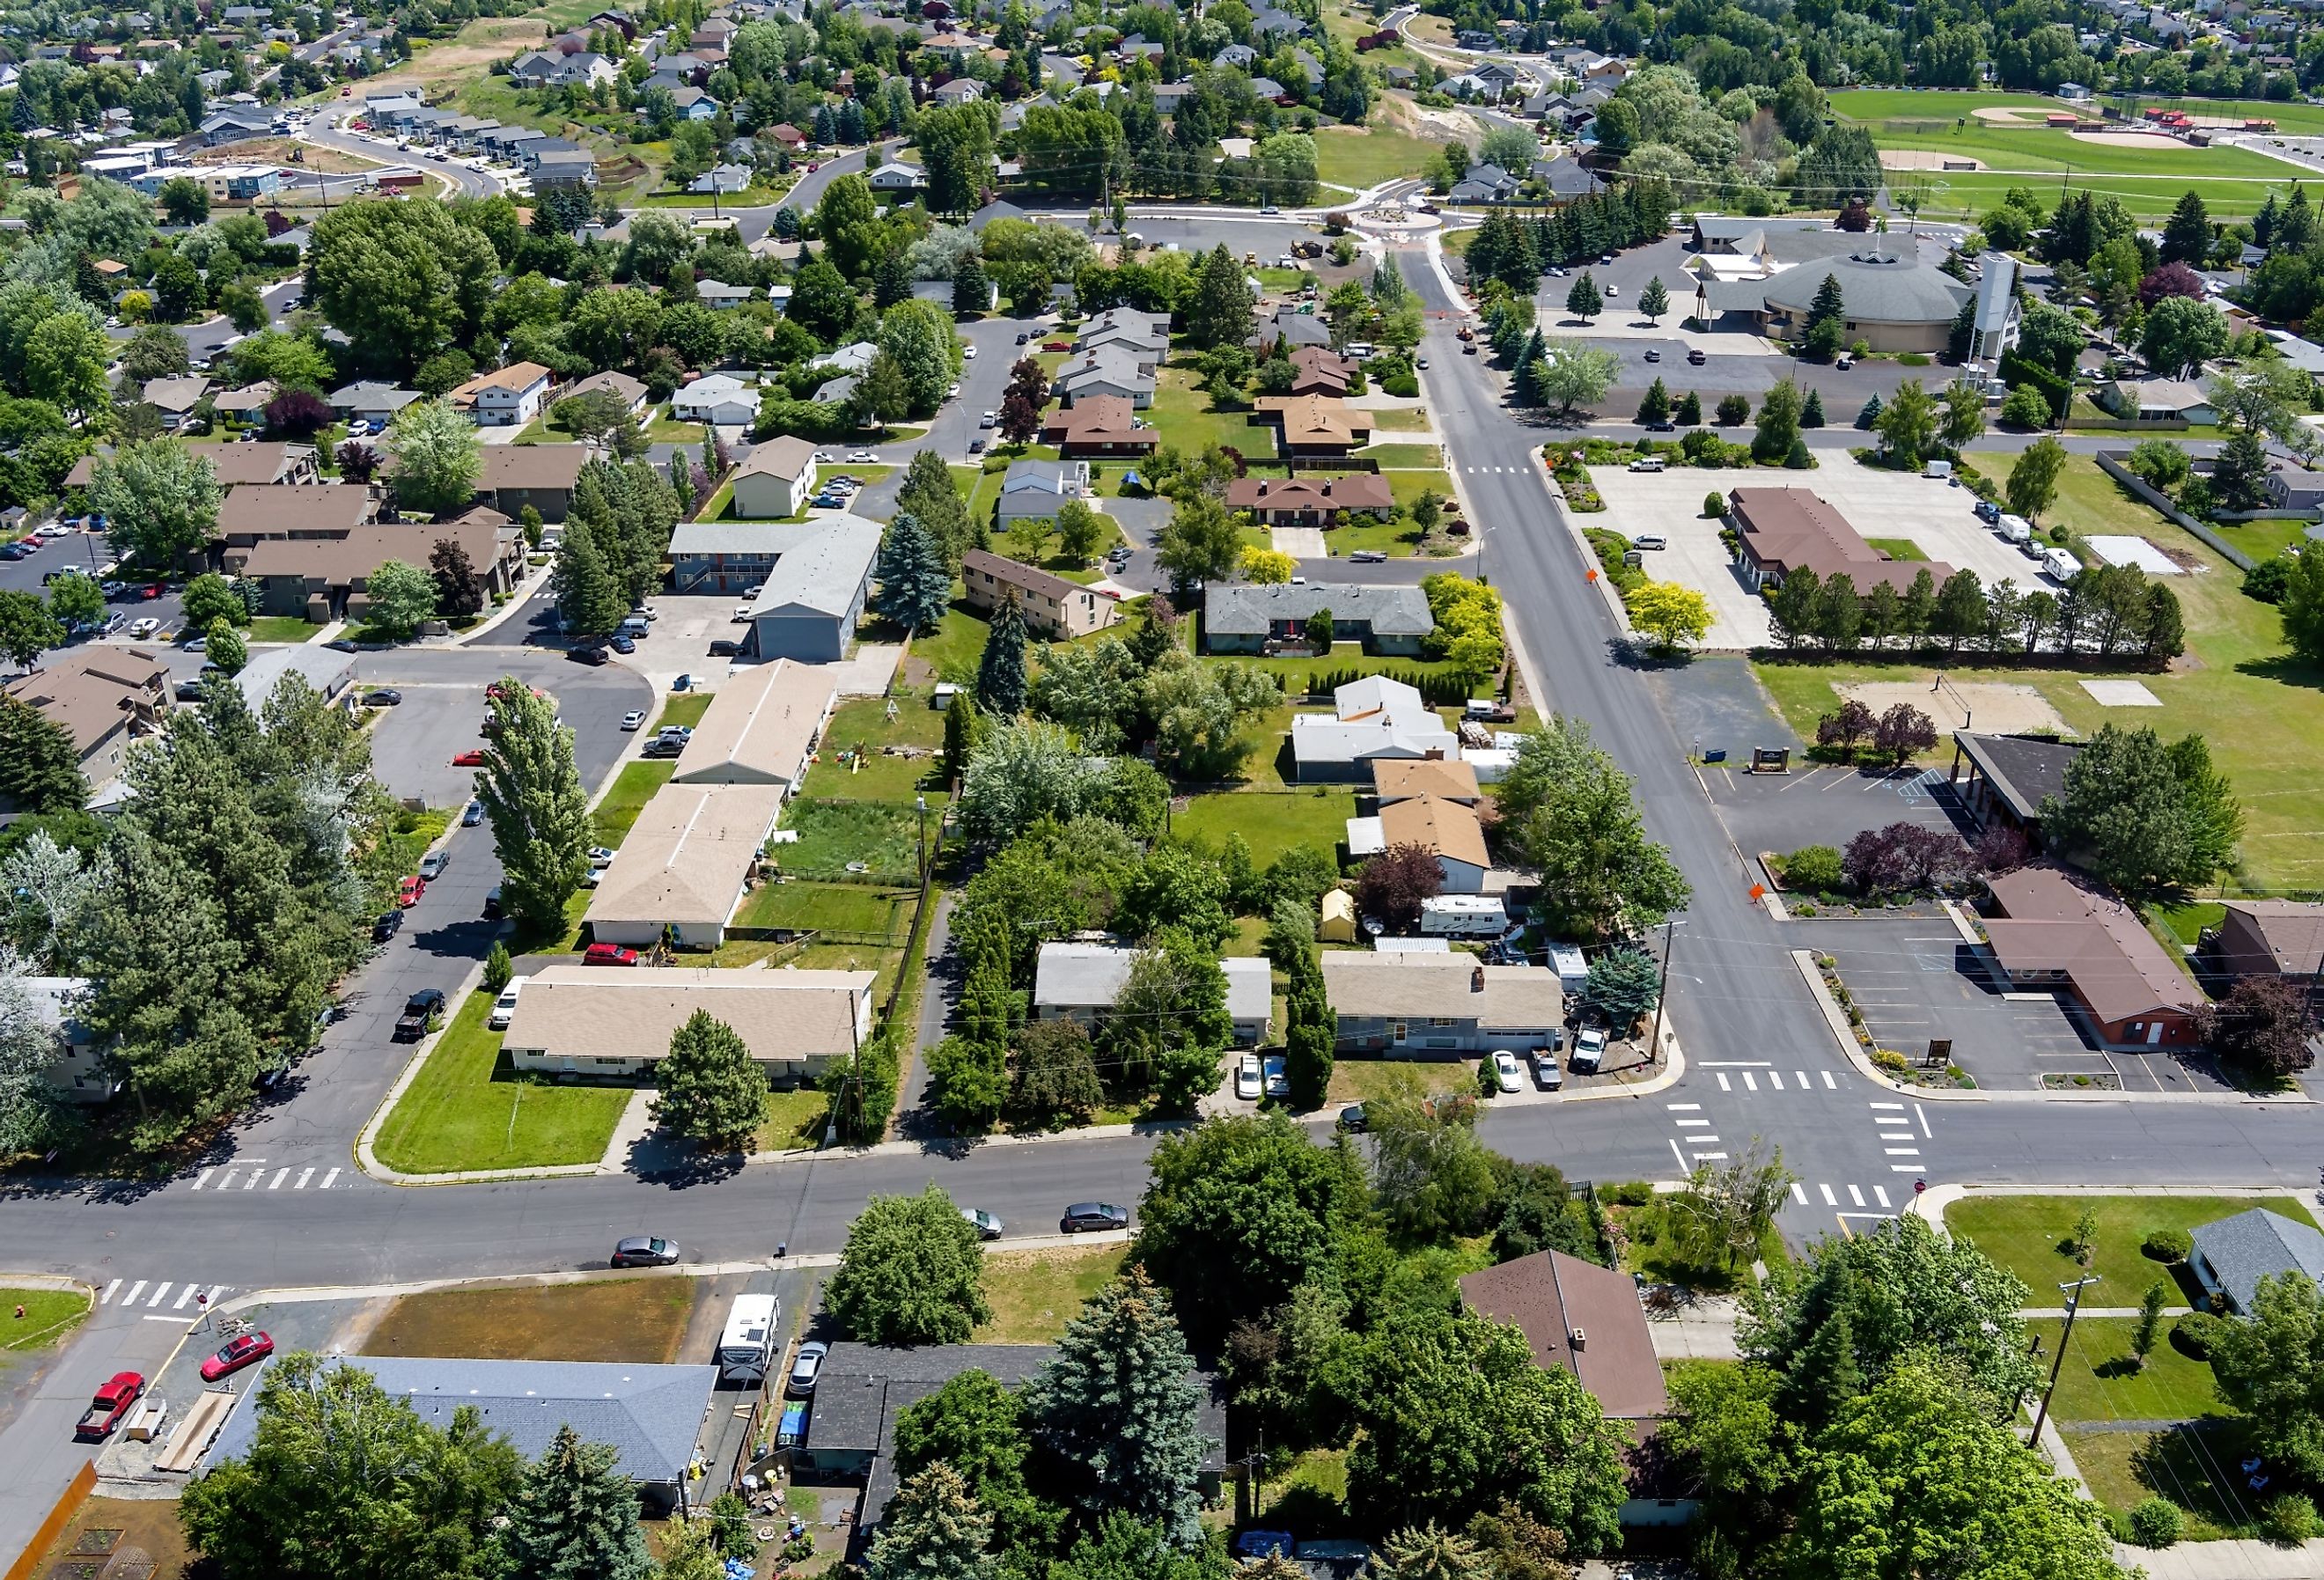 Aerial view of the residential region of Moscow, Idaho